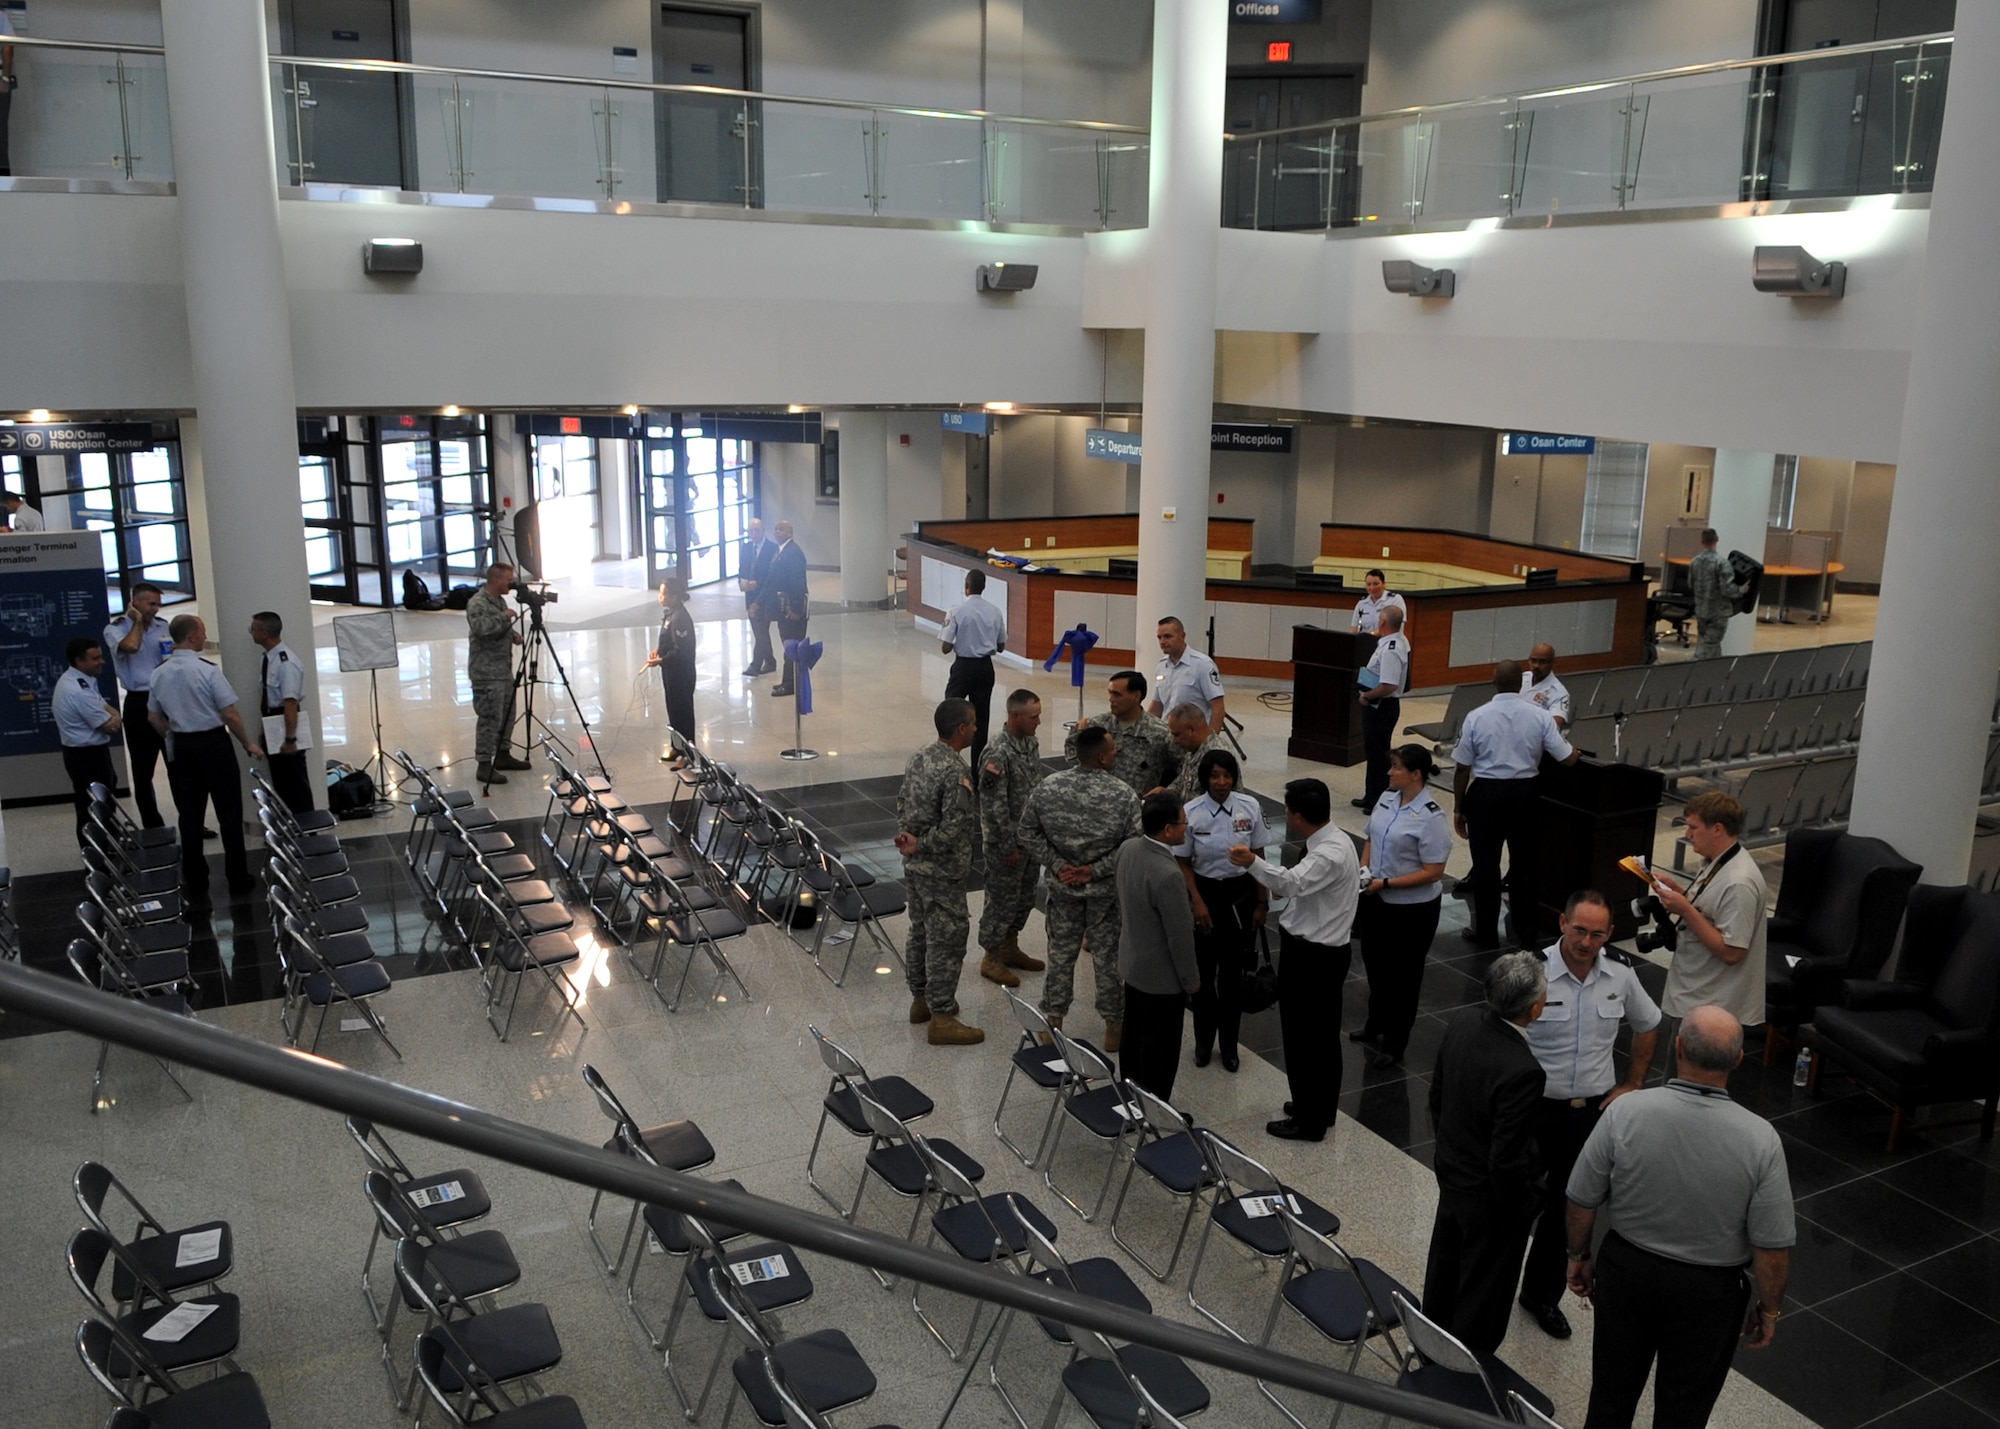 Guests gather around the new Osan passenger terminal Sept. 27 following a ribbon-cutting ceremony Sept. 27. The event was attended by 515th Air Mobility Operations Wing, 7th Air Force, 51st Fighter Wing, local Korean leadership, and others. (U.S. Air Force photo/Senior Airman Evelyn Chavez)